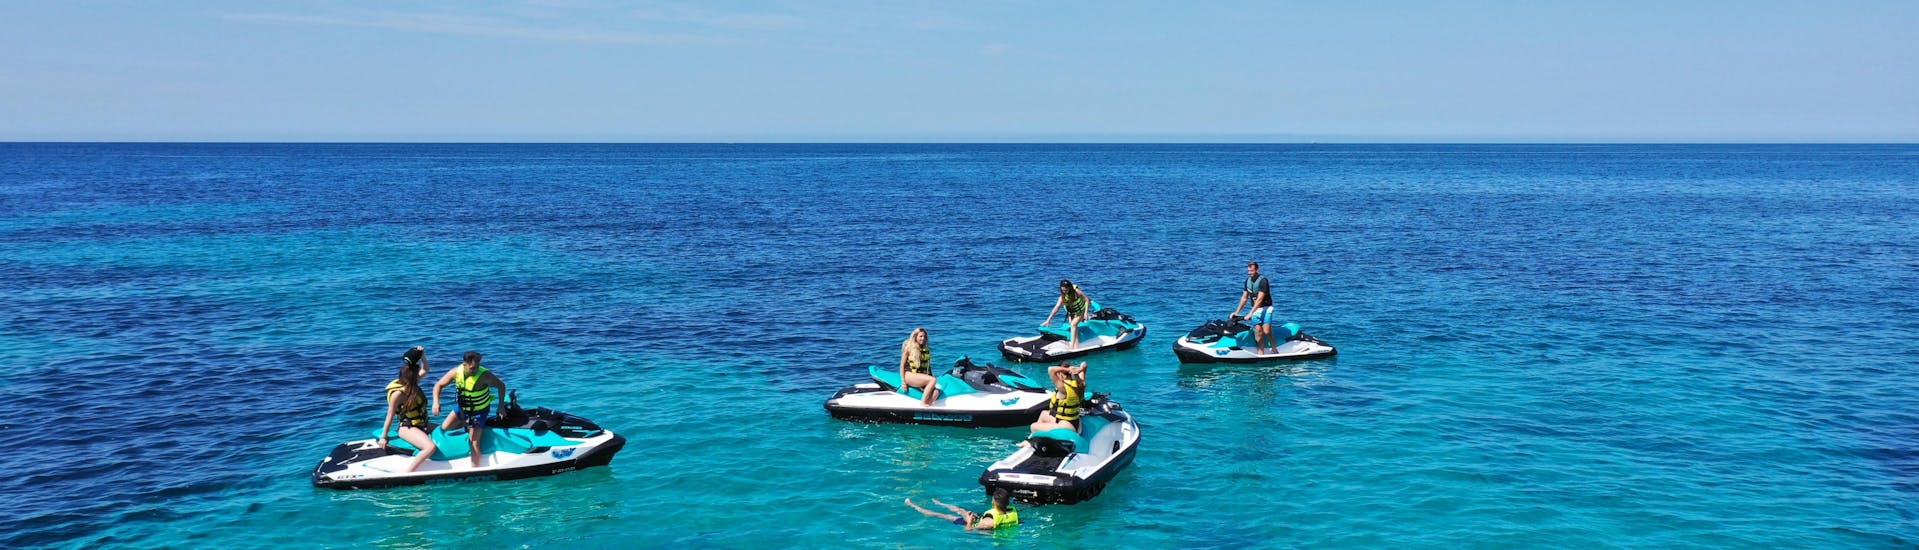 People enjoying aboard of the jetski in the middle of the sea.